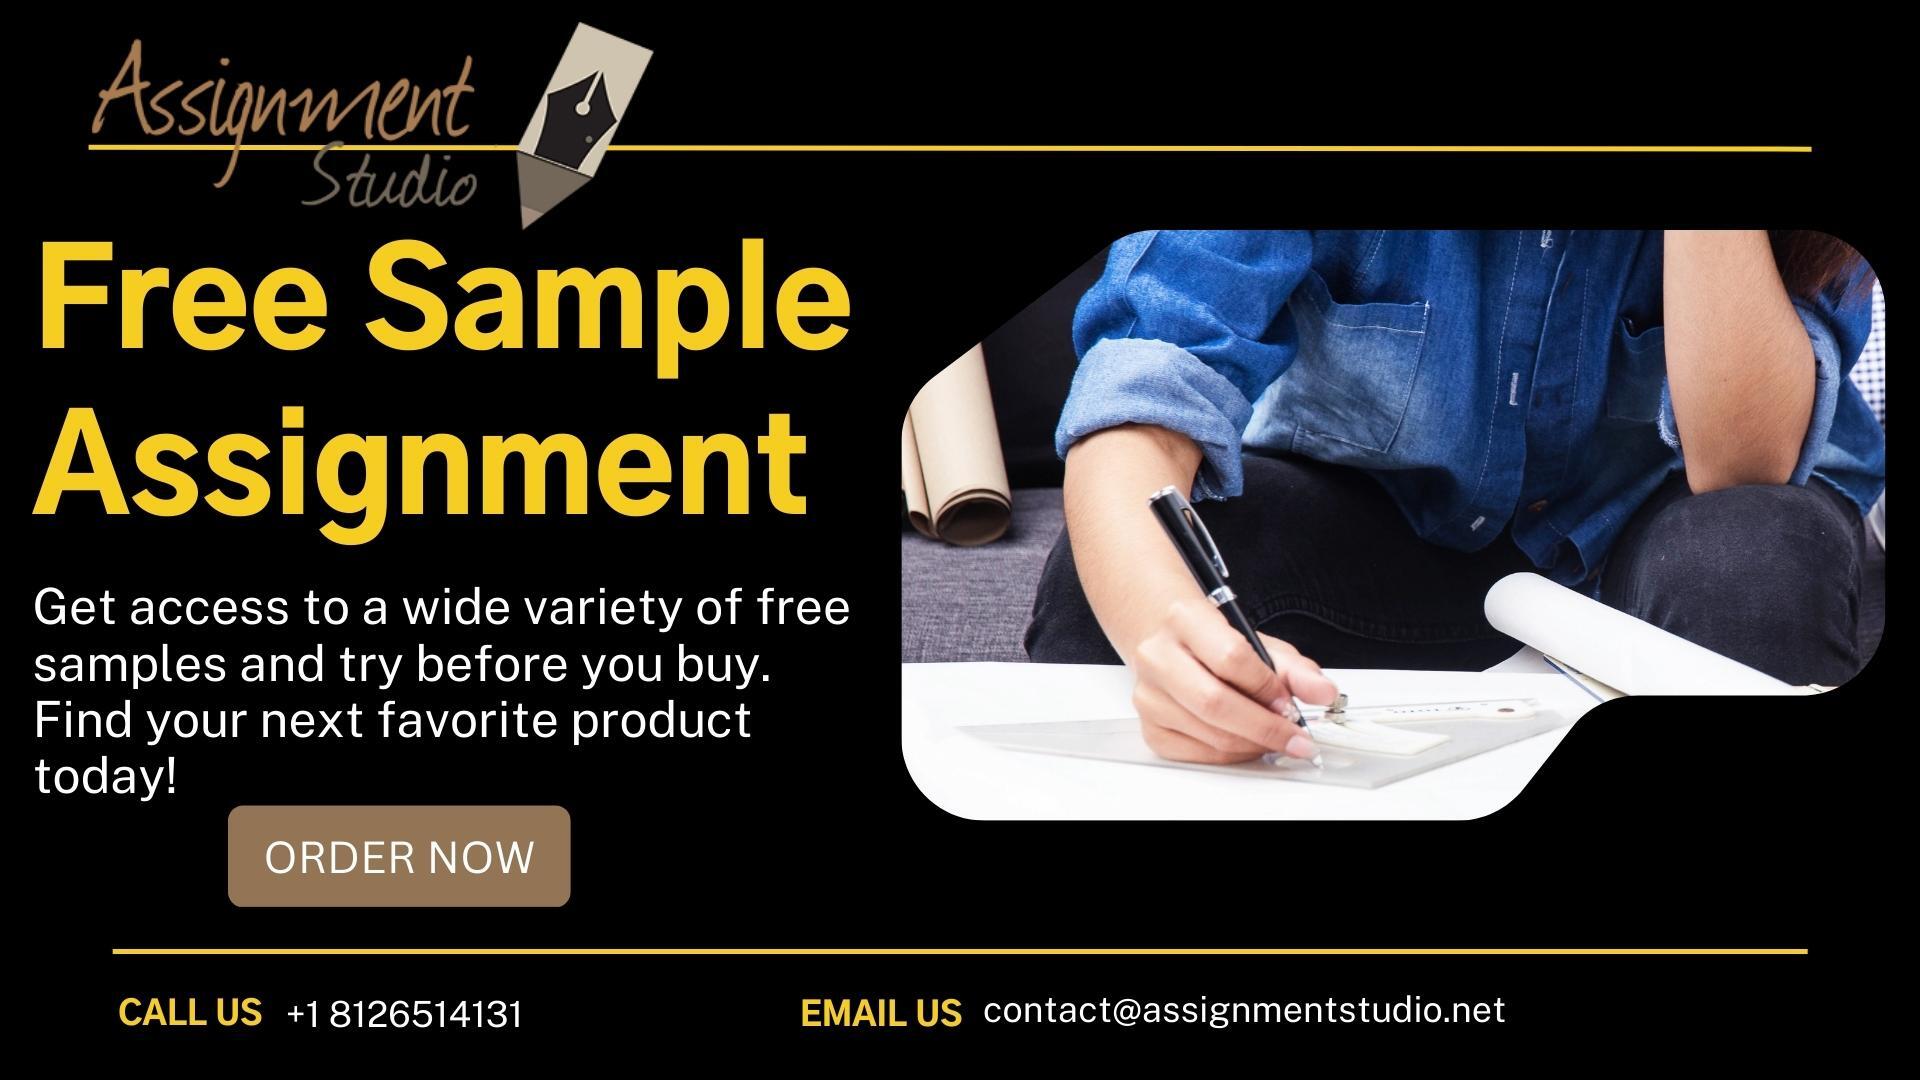 Free Sample Assignment